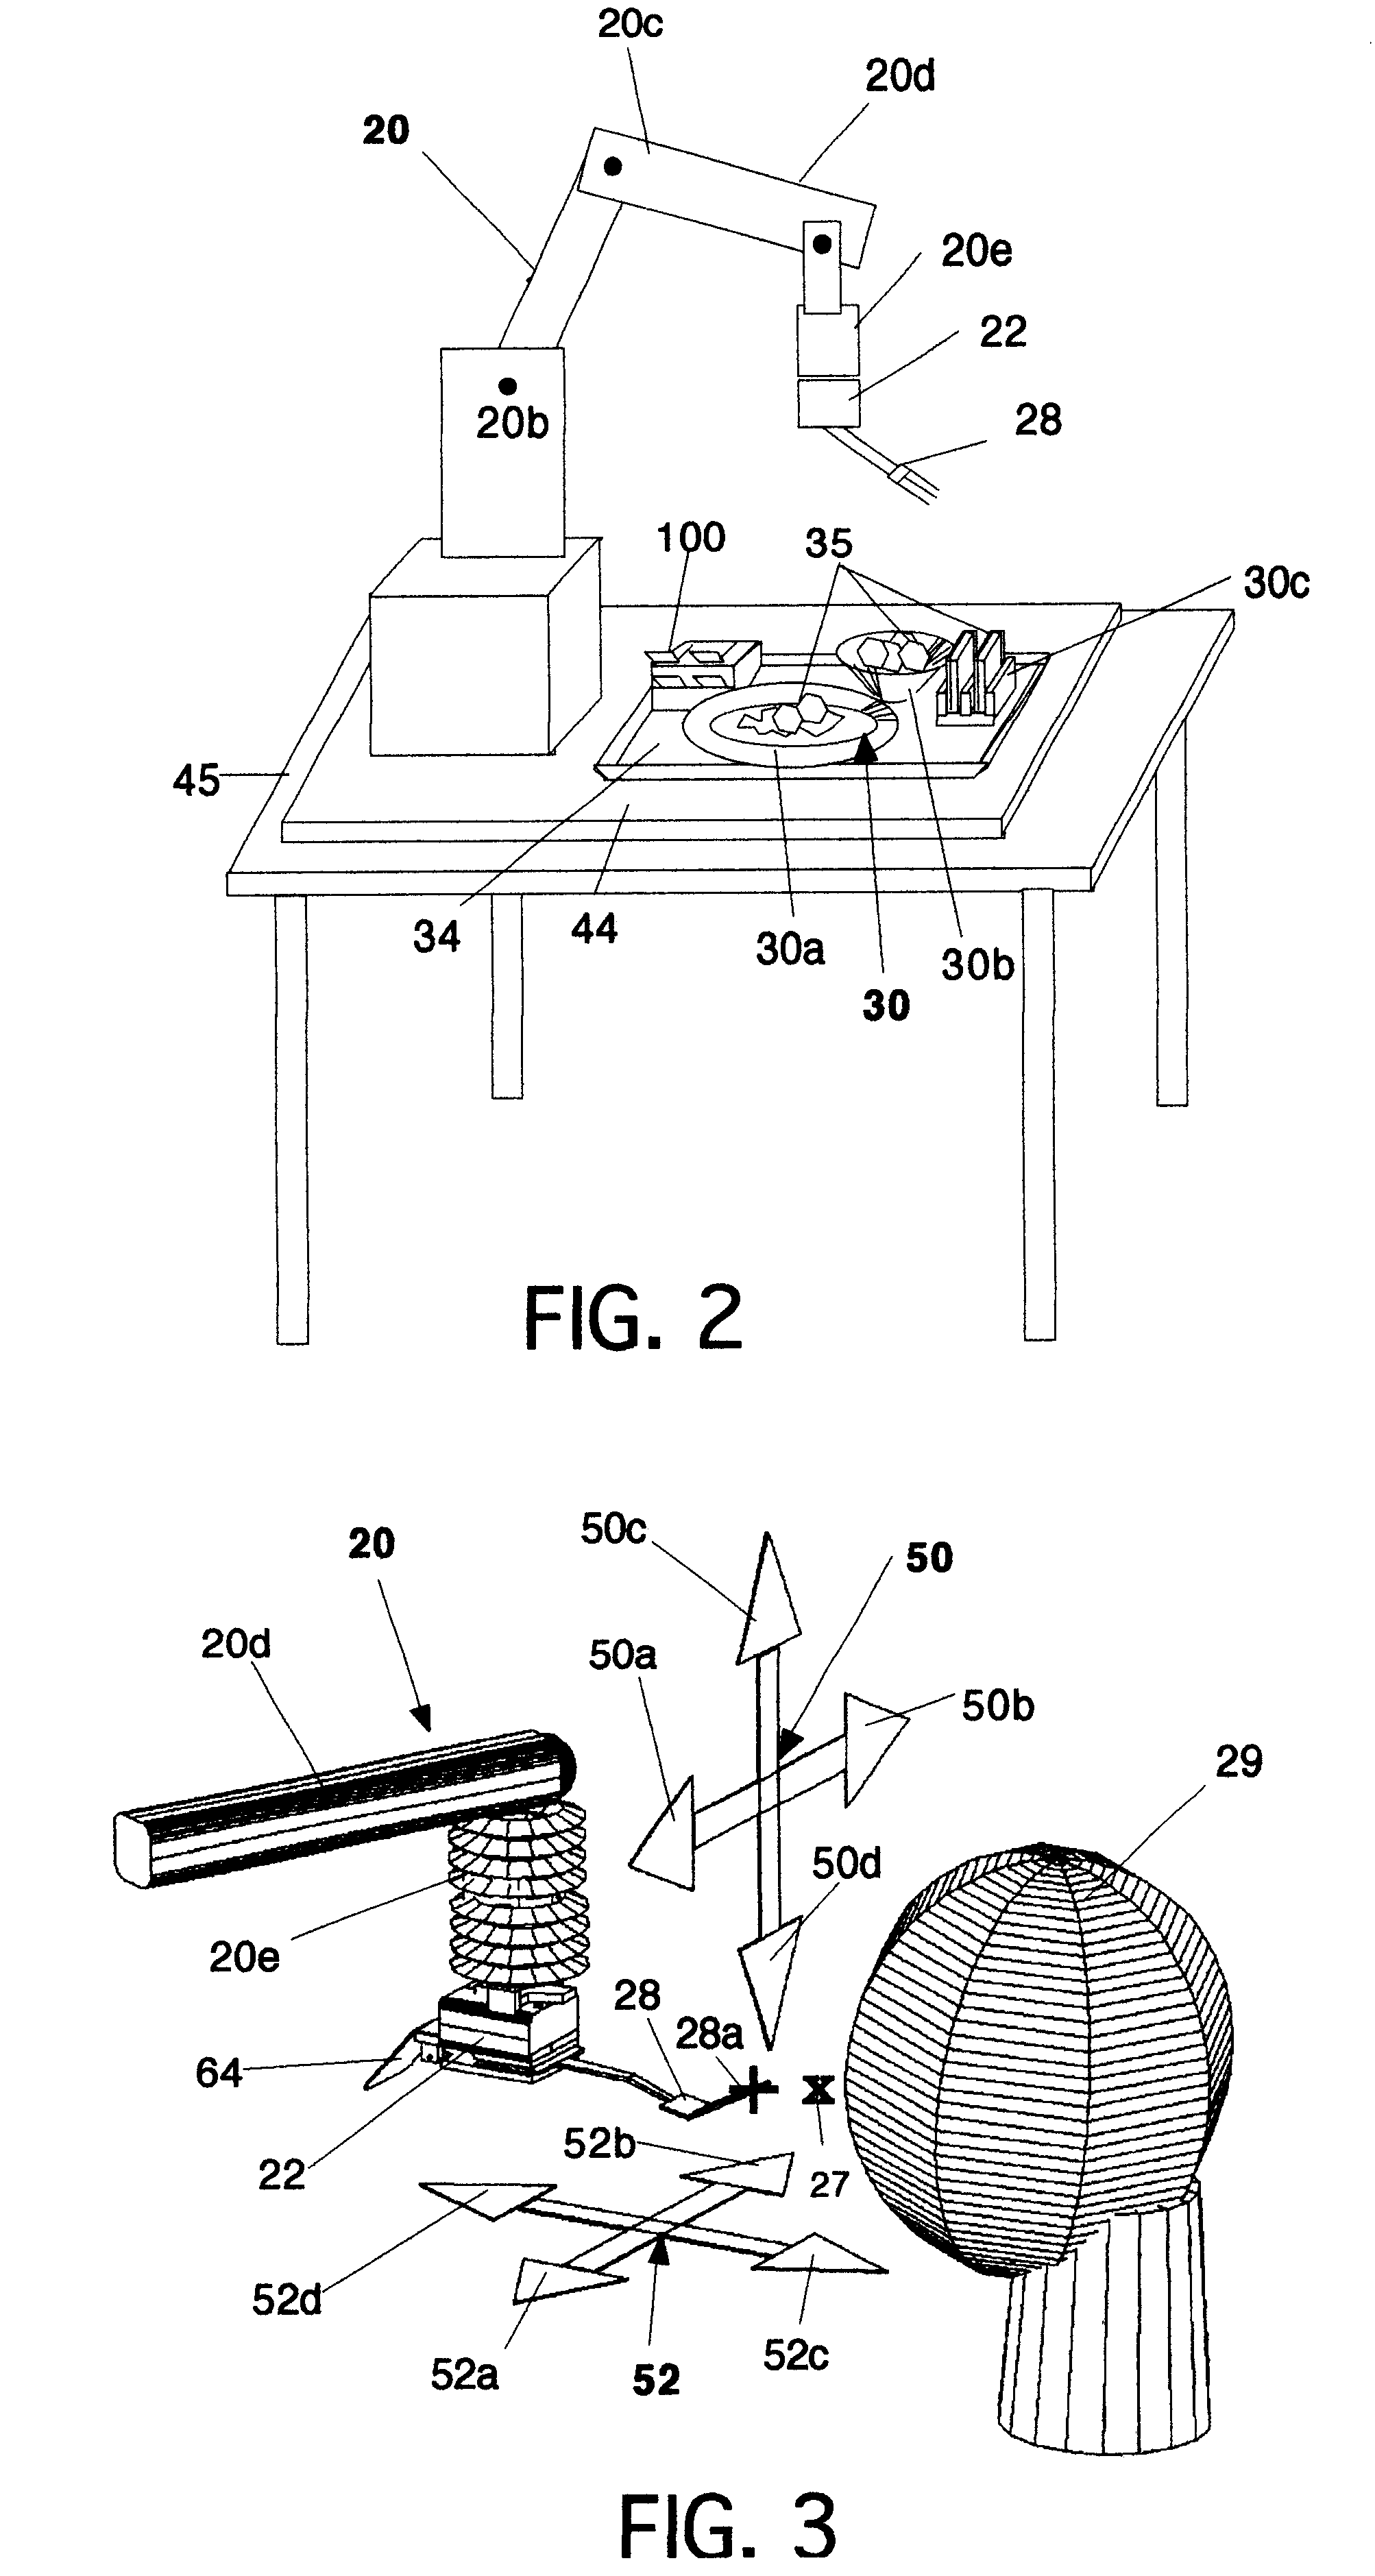 Self-feeding apparatus with hover mode